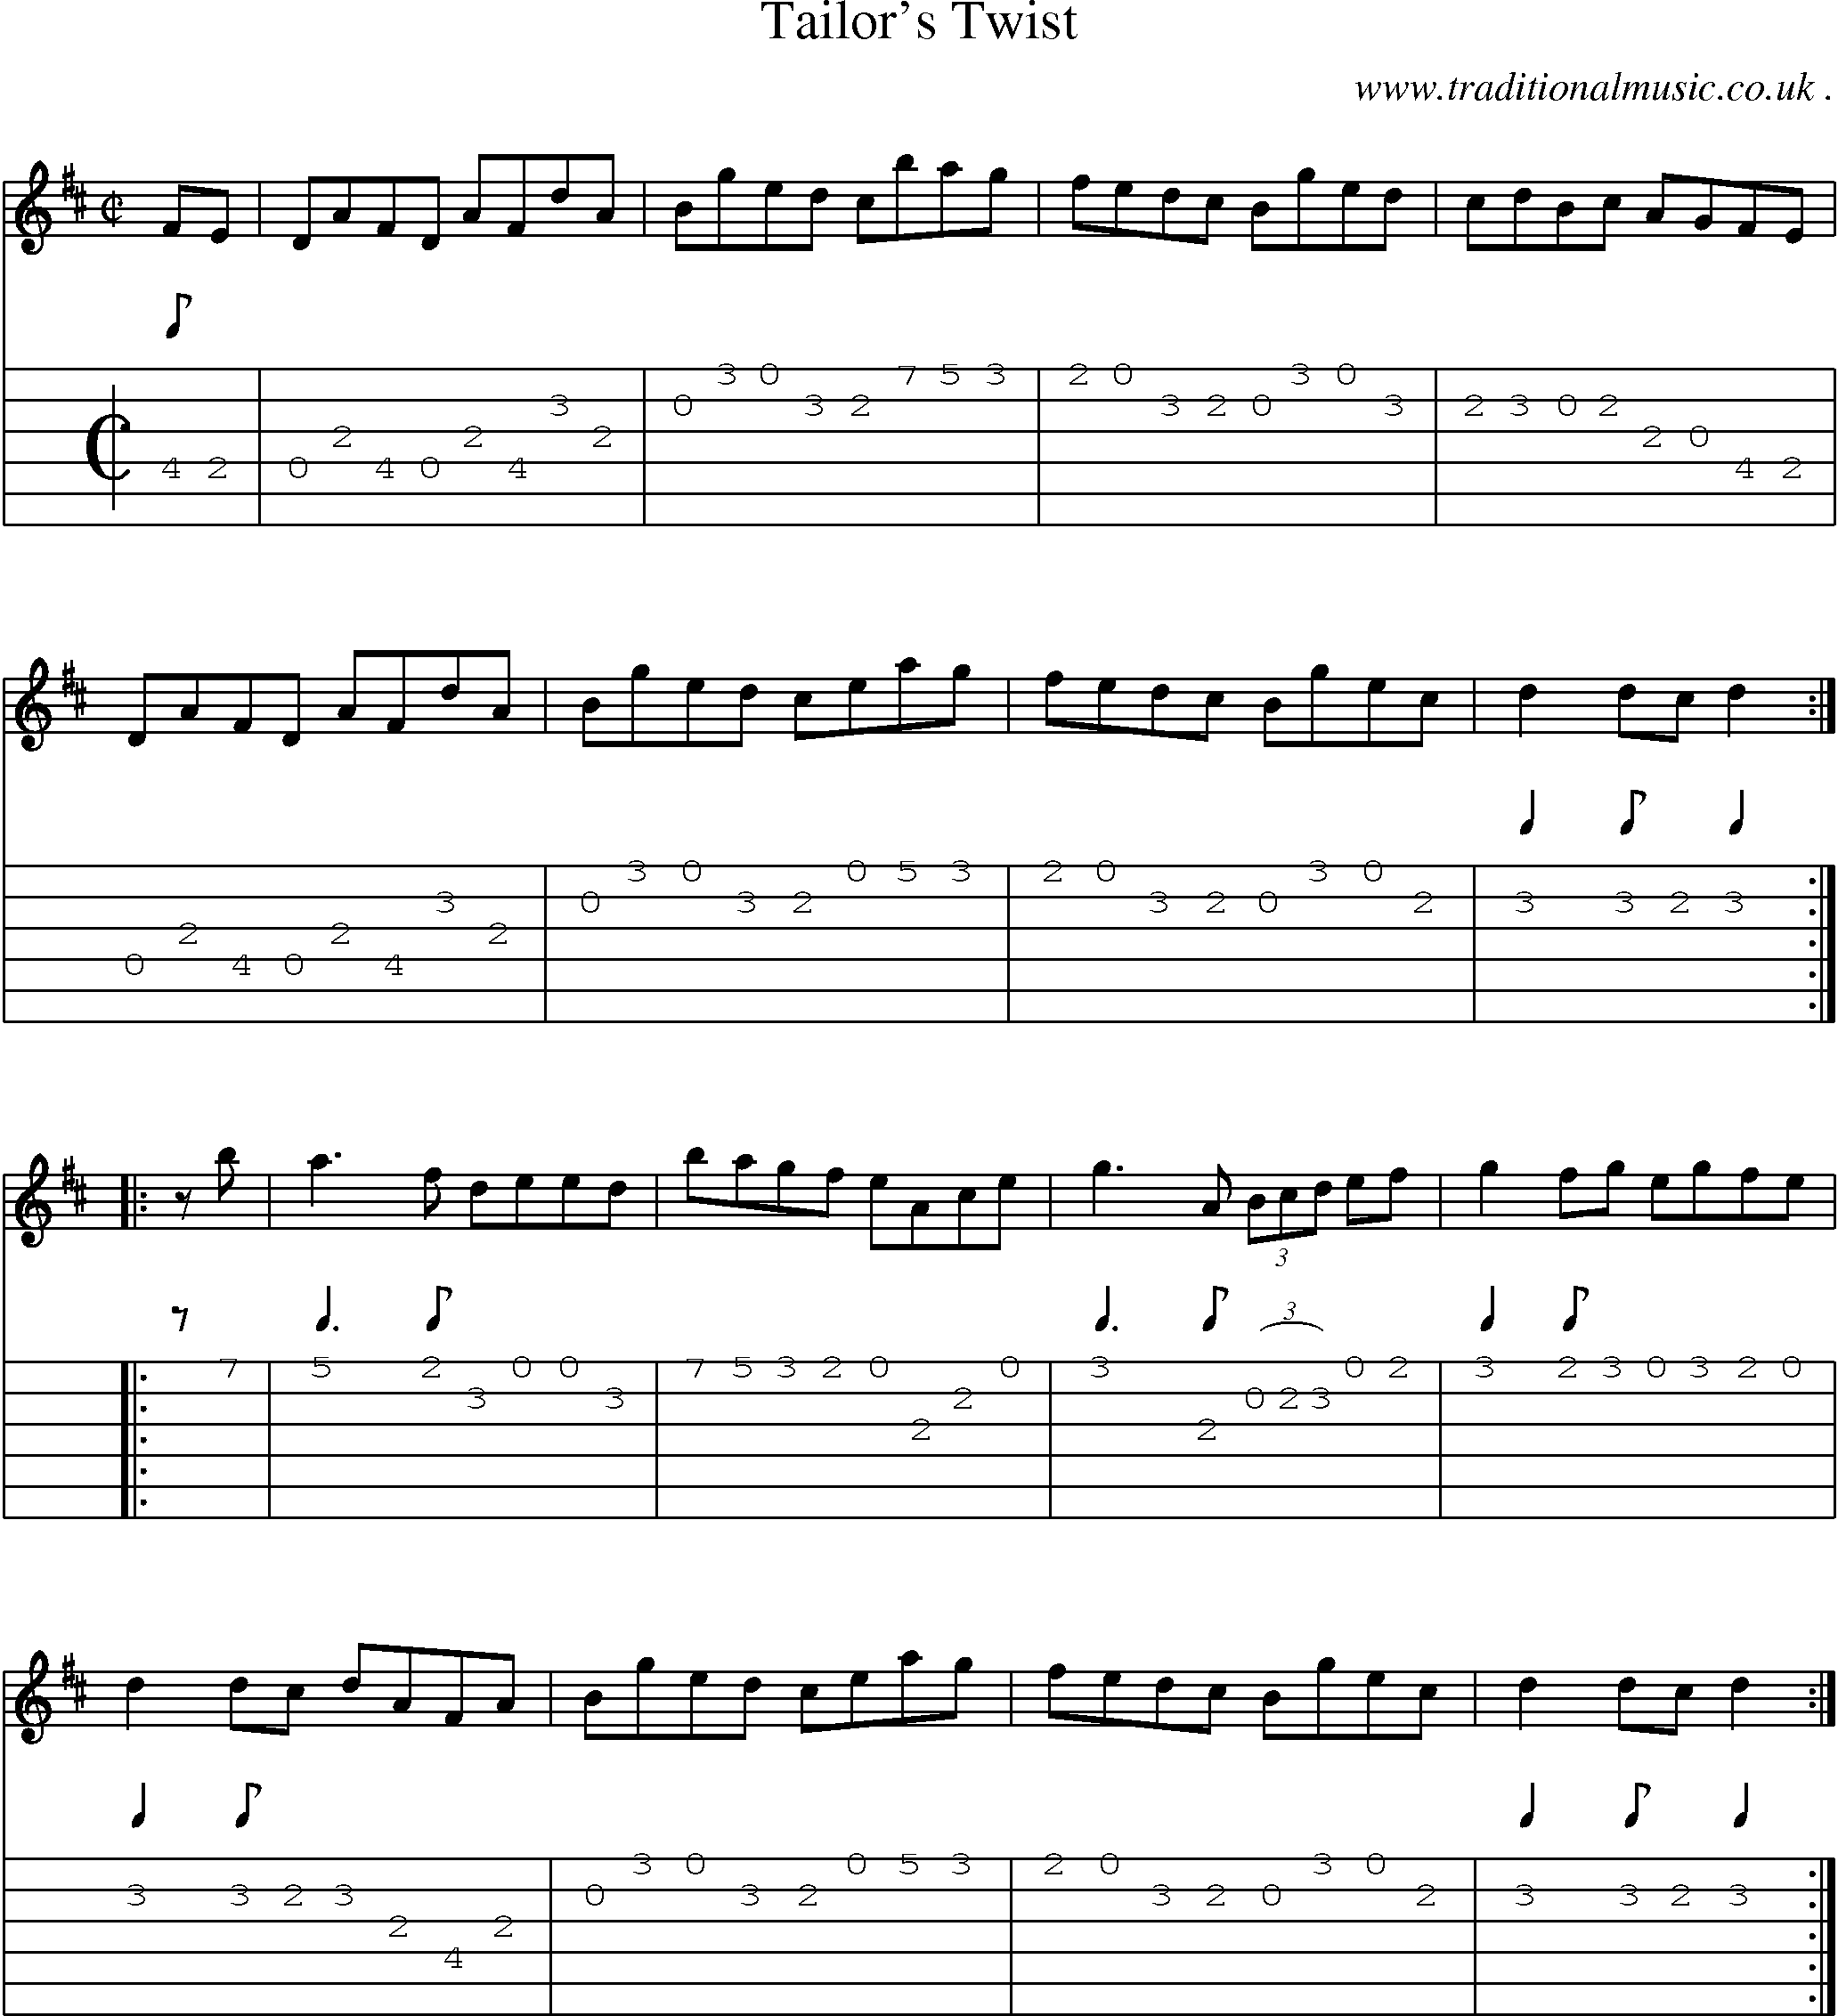 Sheet-Music and Guitar Tabs for Tailors Twist